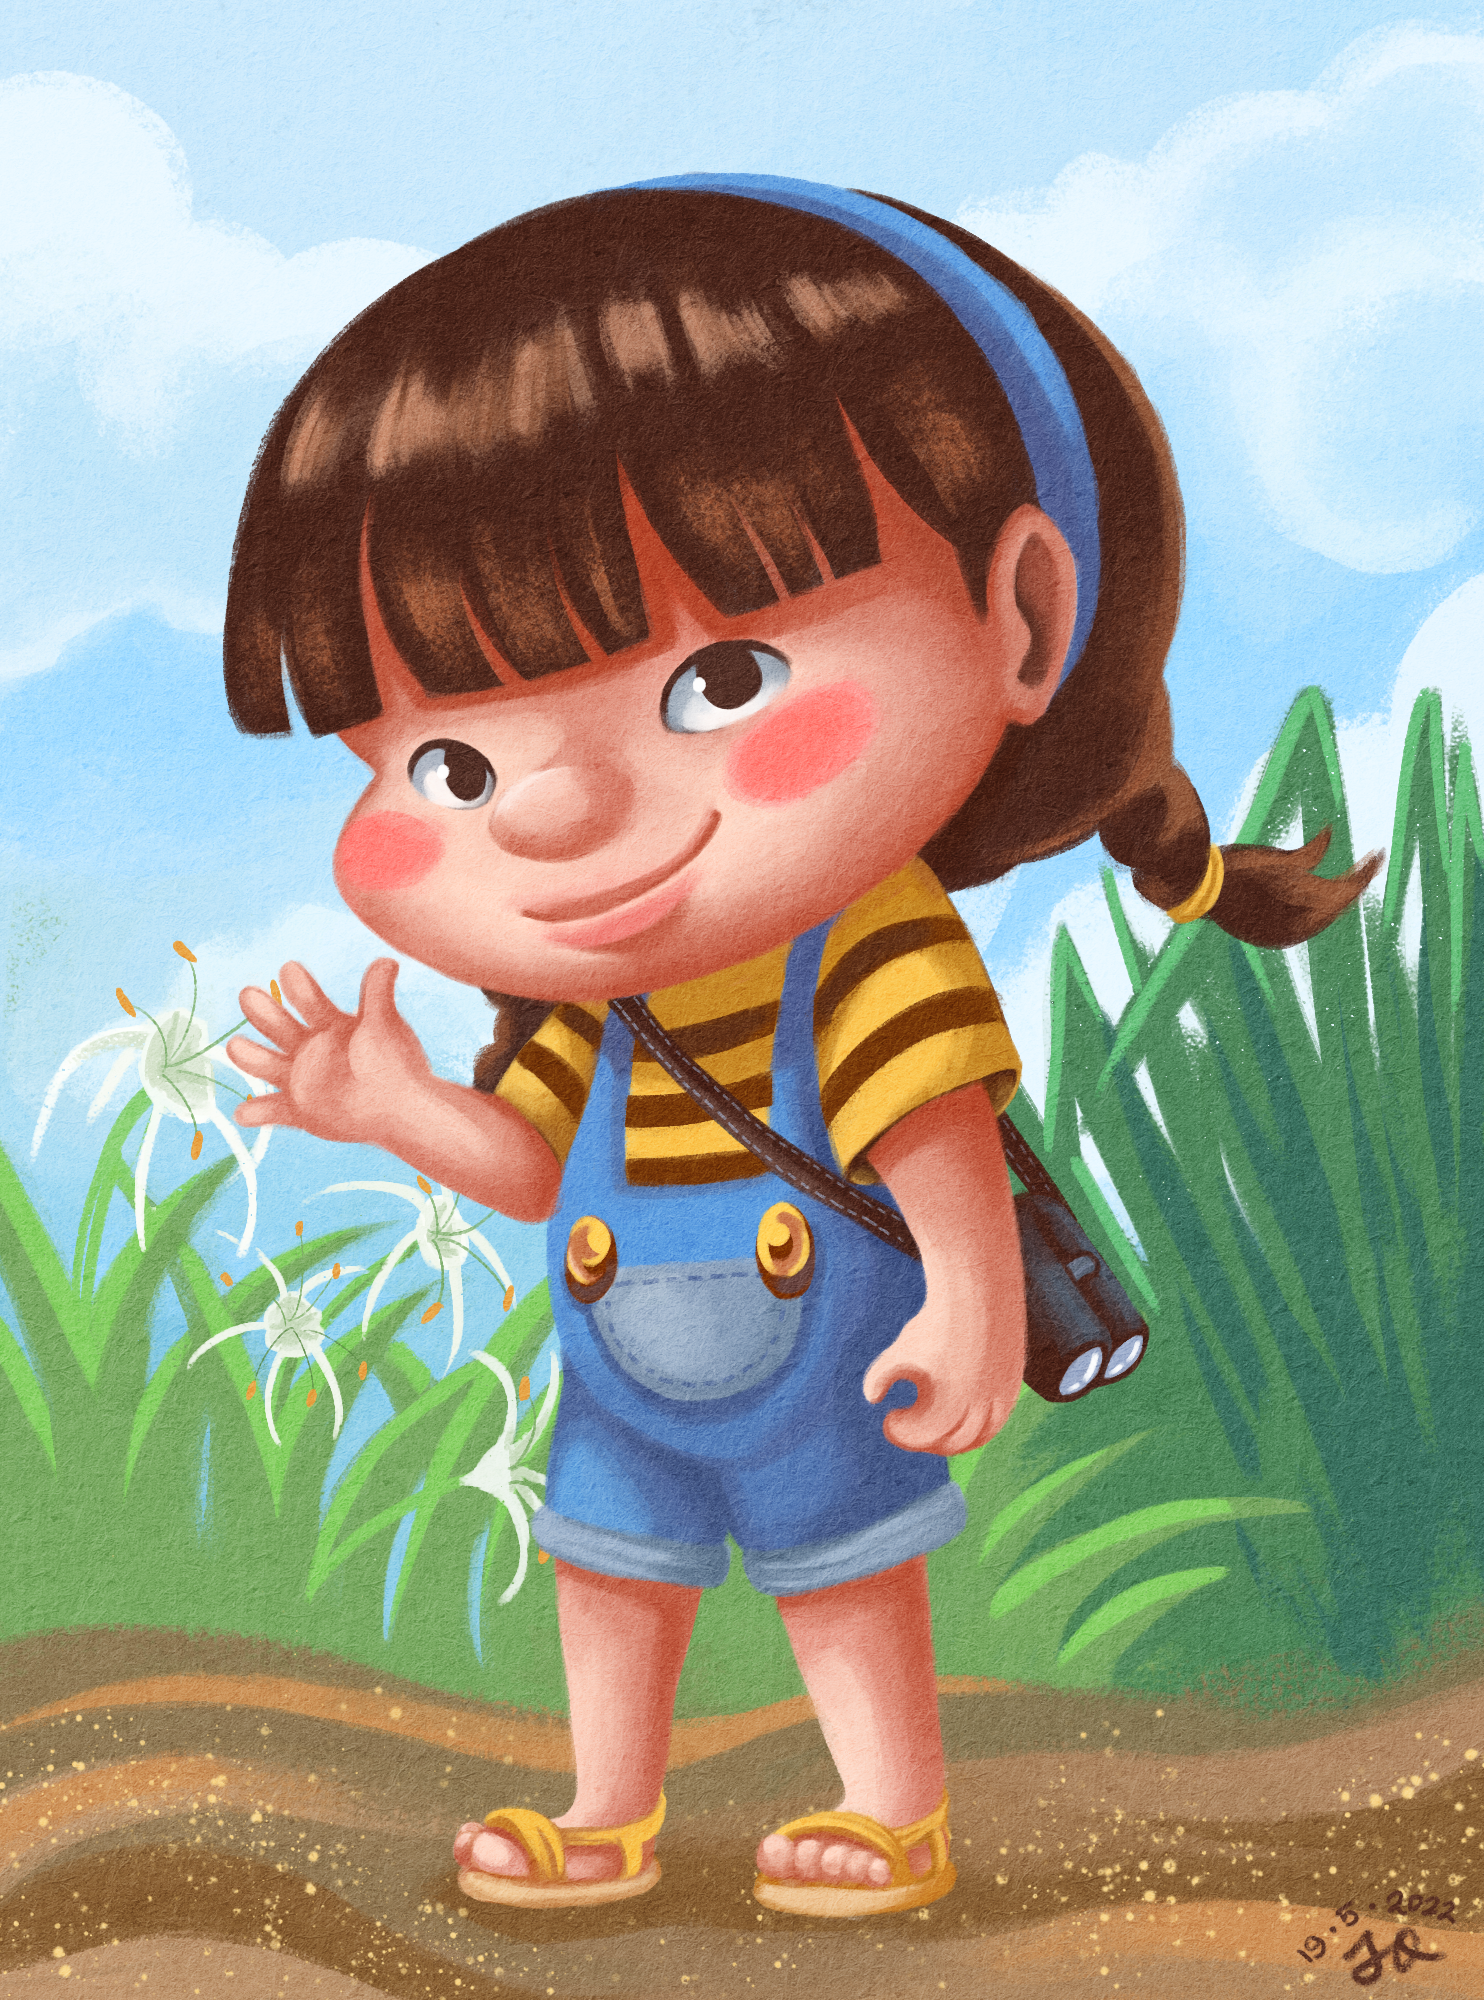 Digital painting of a young girl with a blue hairband and pigtails in a denim jumpsuit and striped yellow T-shirt, with a pair of binoculars slung over her shoulder. She is standing in a park with spider lilies and tall grass in the background on a clear day with white clouds against a blue sky, and waving at the viewer.